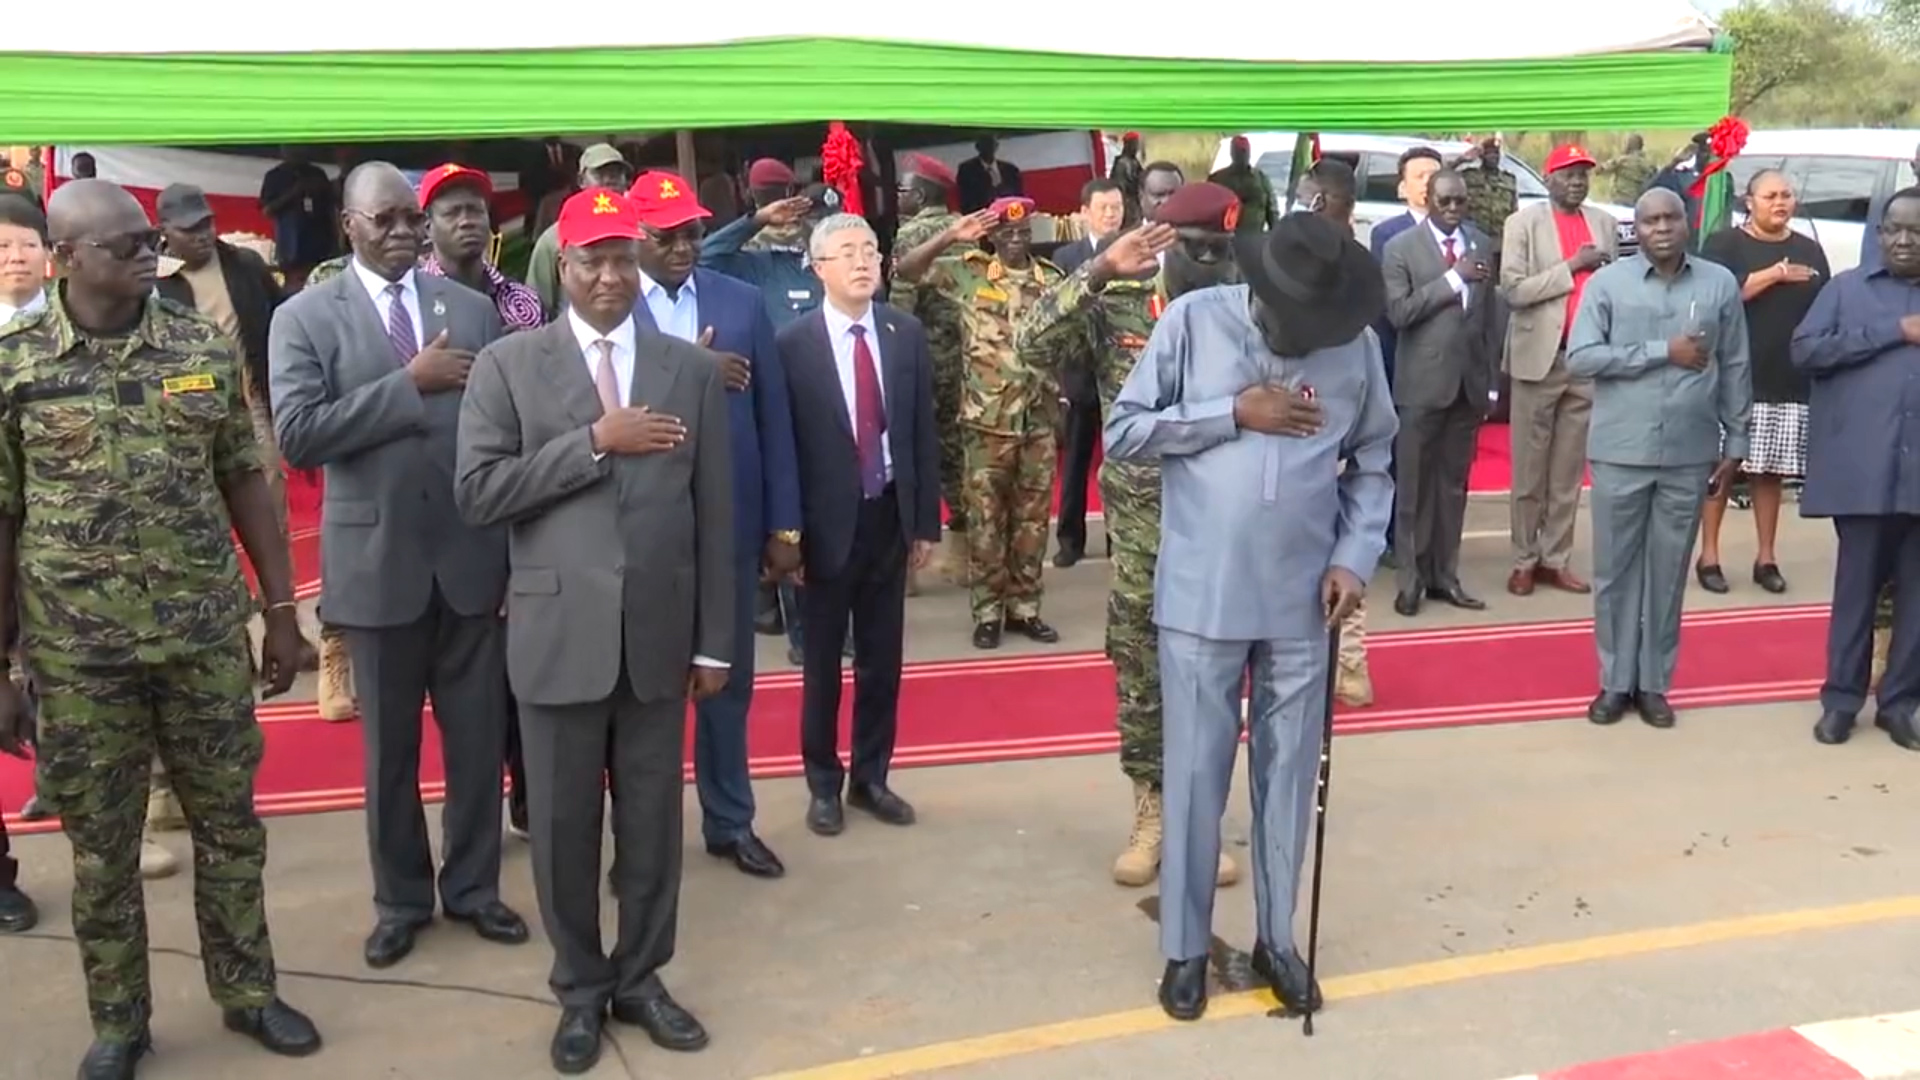 South Sudanese President Salva Kiir urinates on himself during an official ceremony